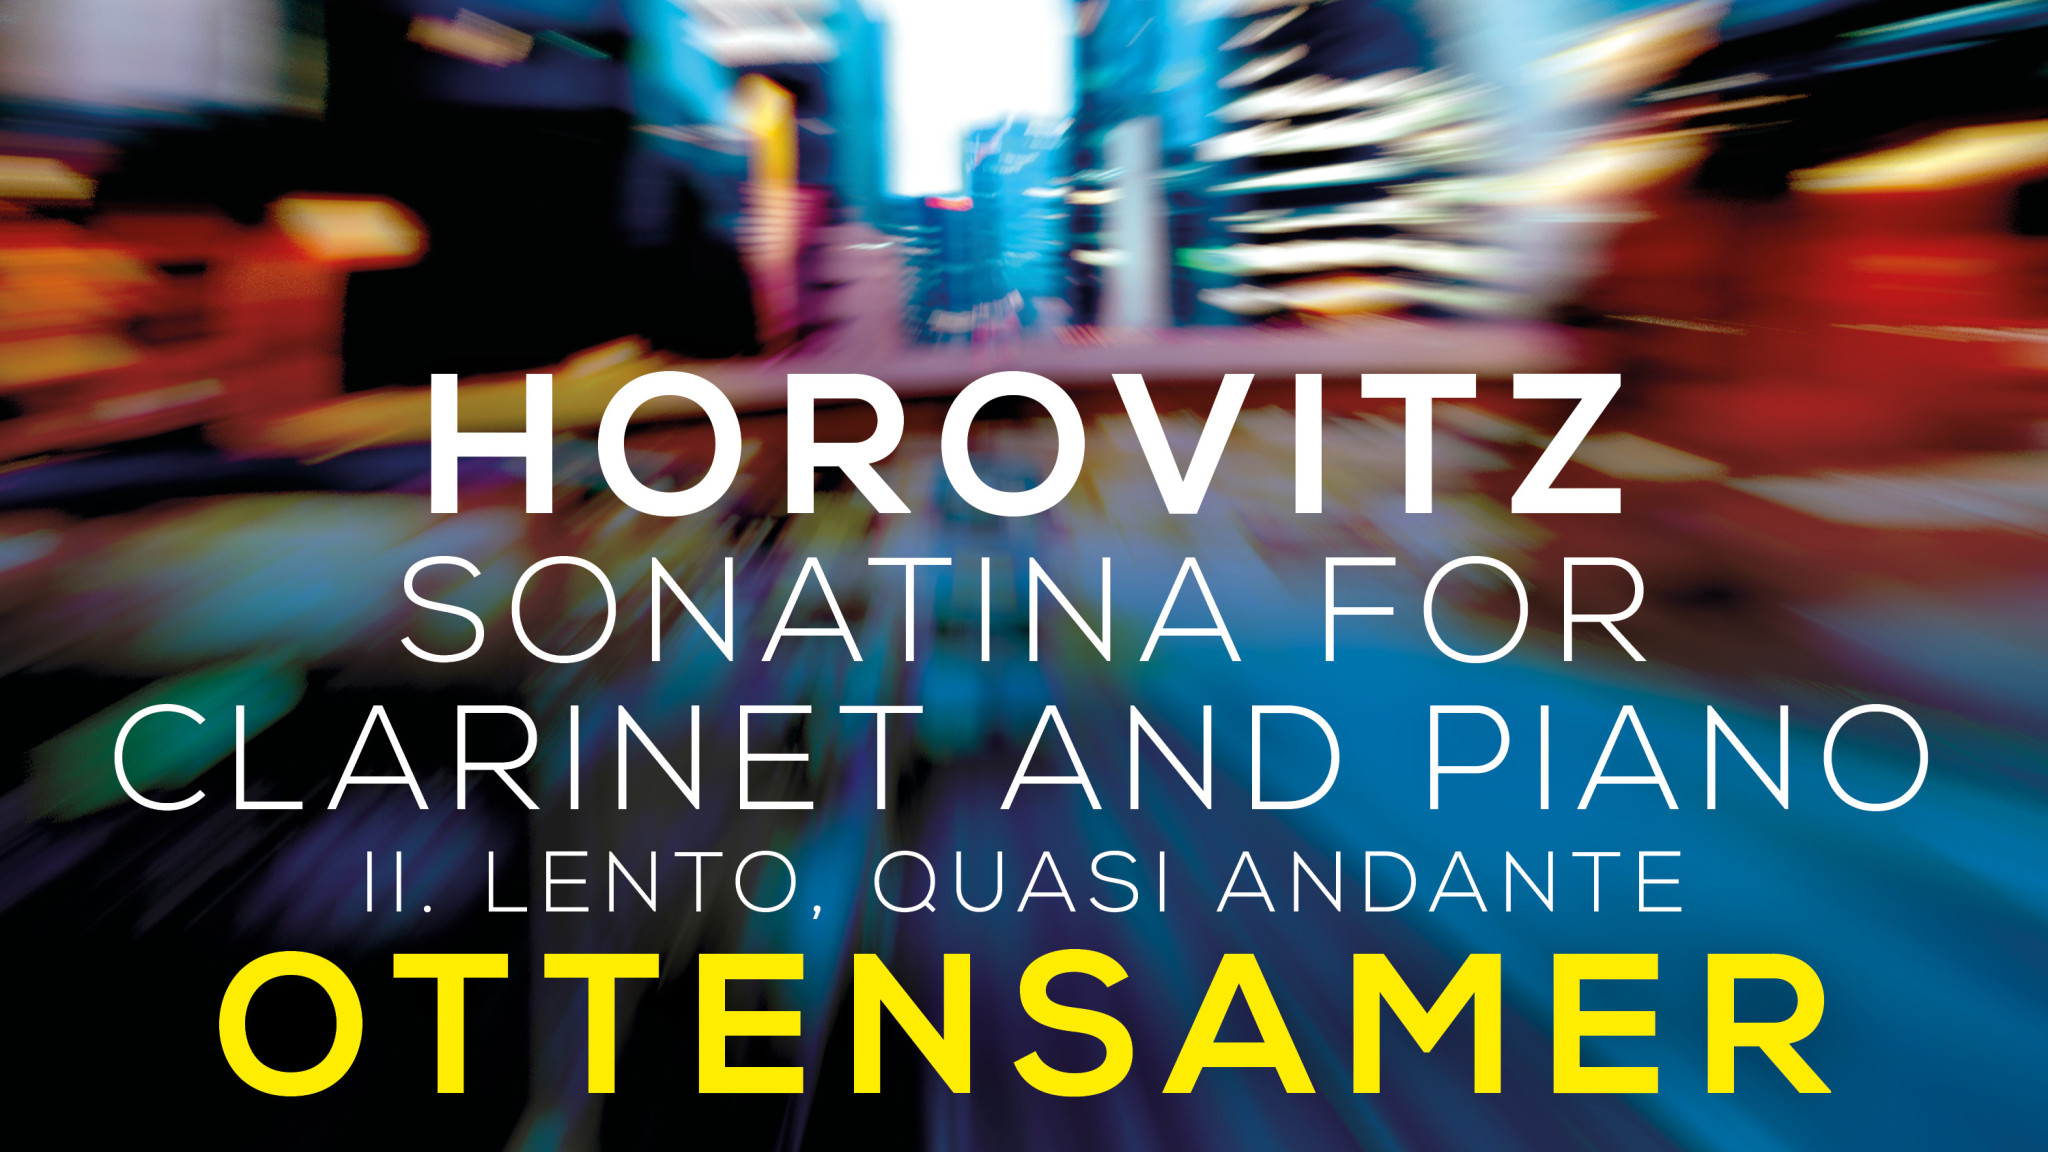 Musical Moments – Andreas Ottensamer performs Julien Quentin Horovitz’ Sonatina for Clarinet and Piano - II. Lento, quasi andante